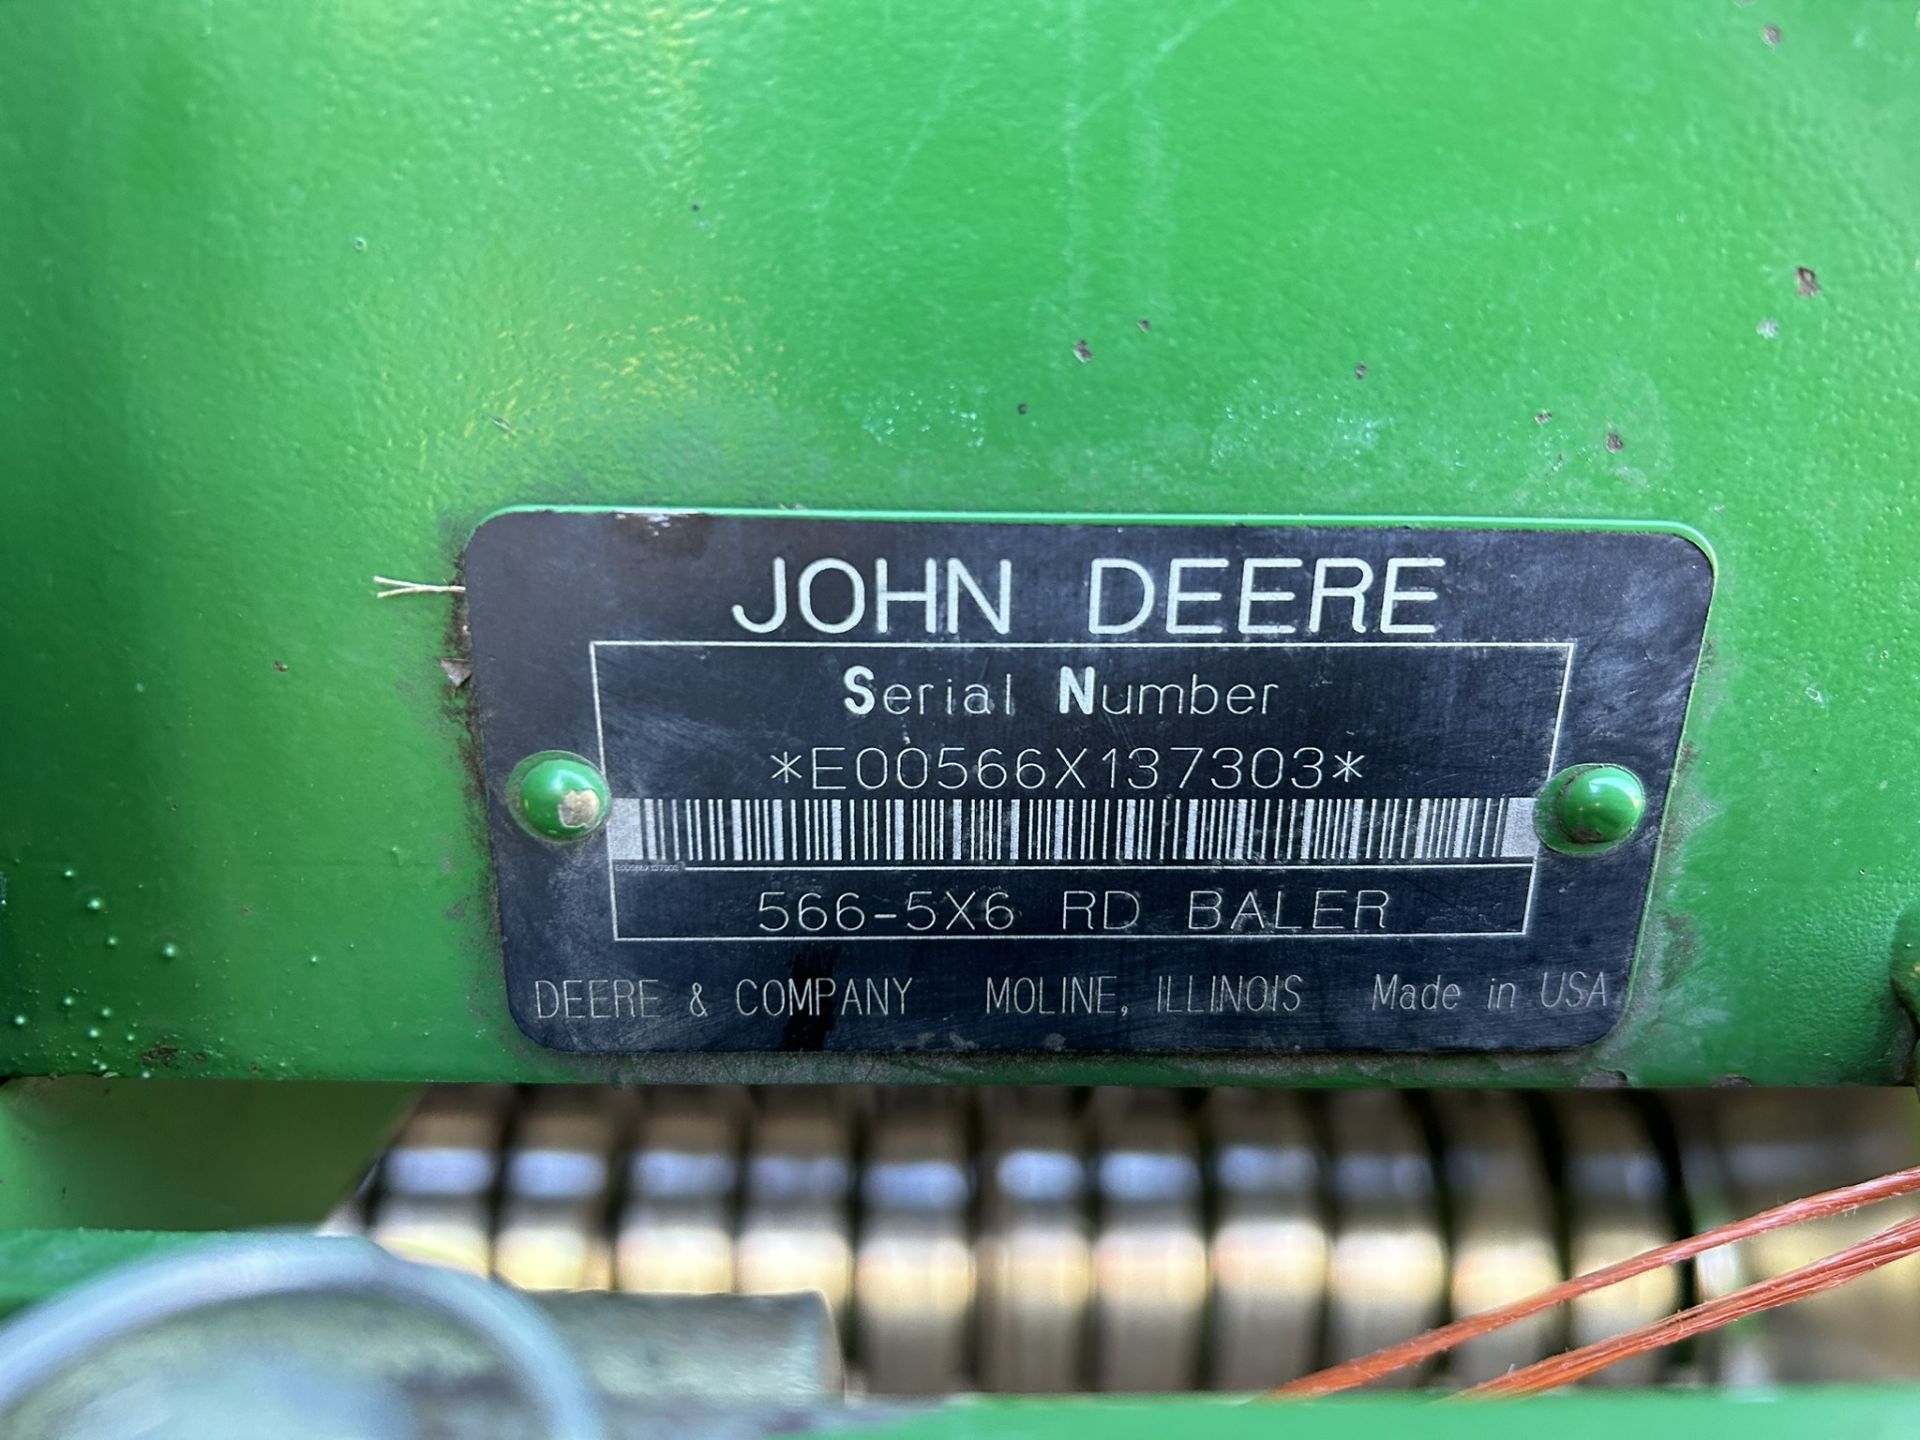 JOHN DEERE 566 ROUND BALER W/ GANDY INNOCULANT APPLICATOR, CAB MONITOR (IN OFFICE), PTO (IN OFFICE), - Image 7 of 7